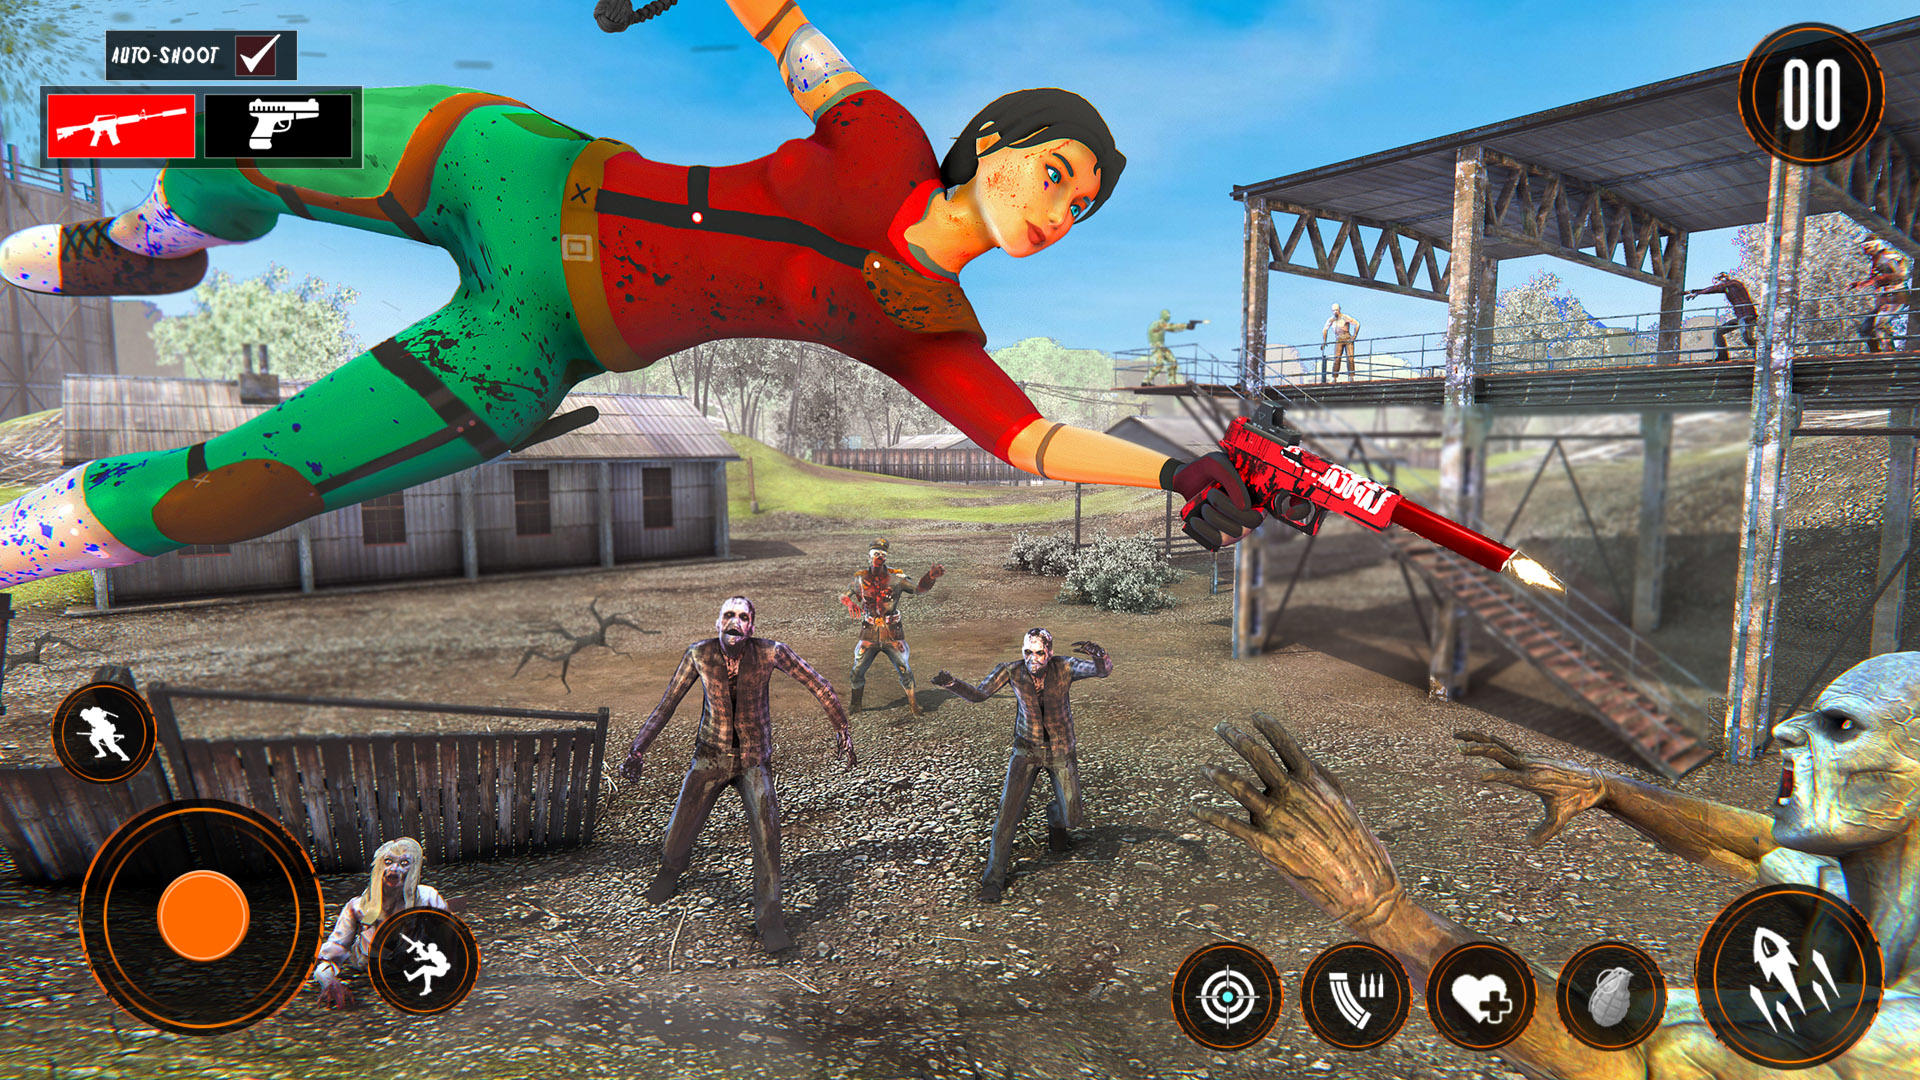 Zombie Shooter: Evil Dead for Android - Free App Download